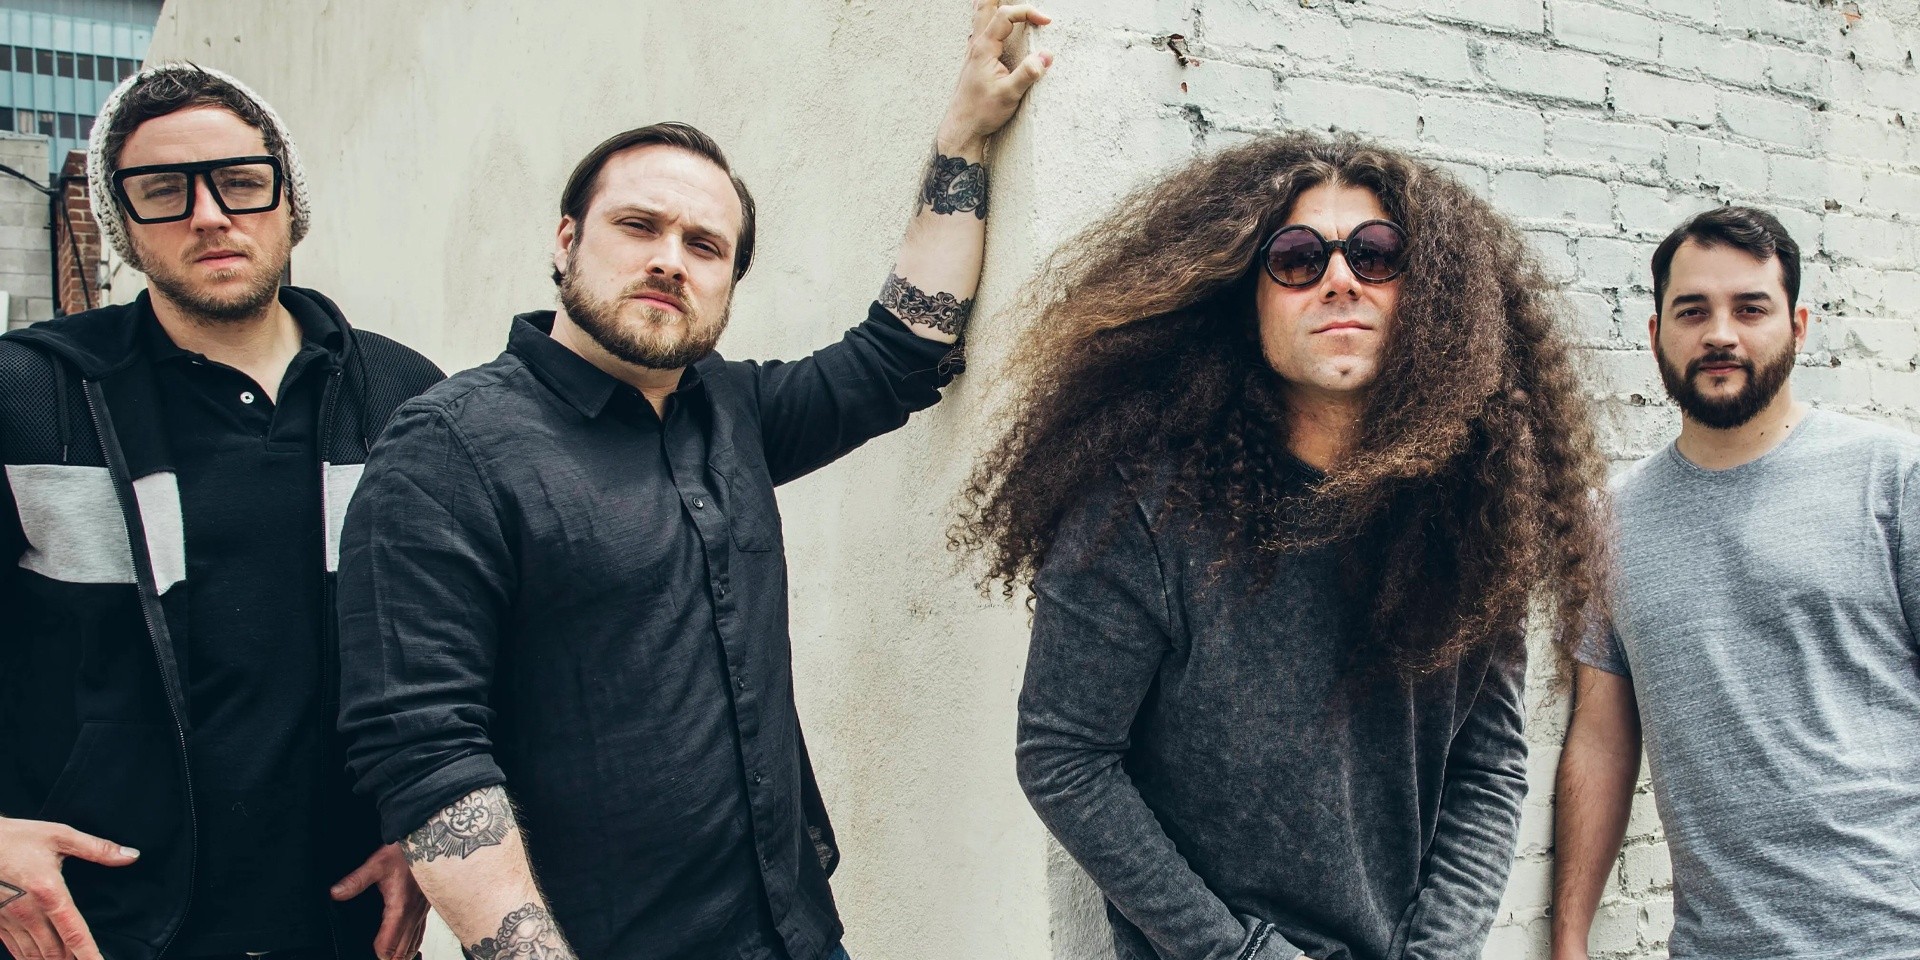 Coheed and Cambria return with hard-hitting music video 'Shoulders' – watch